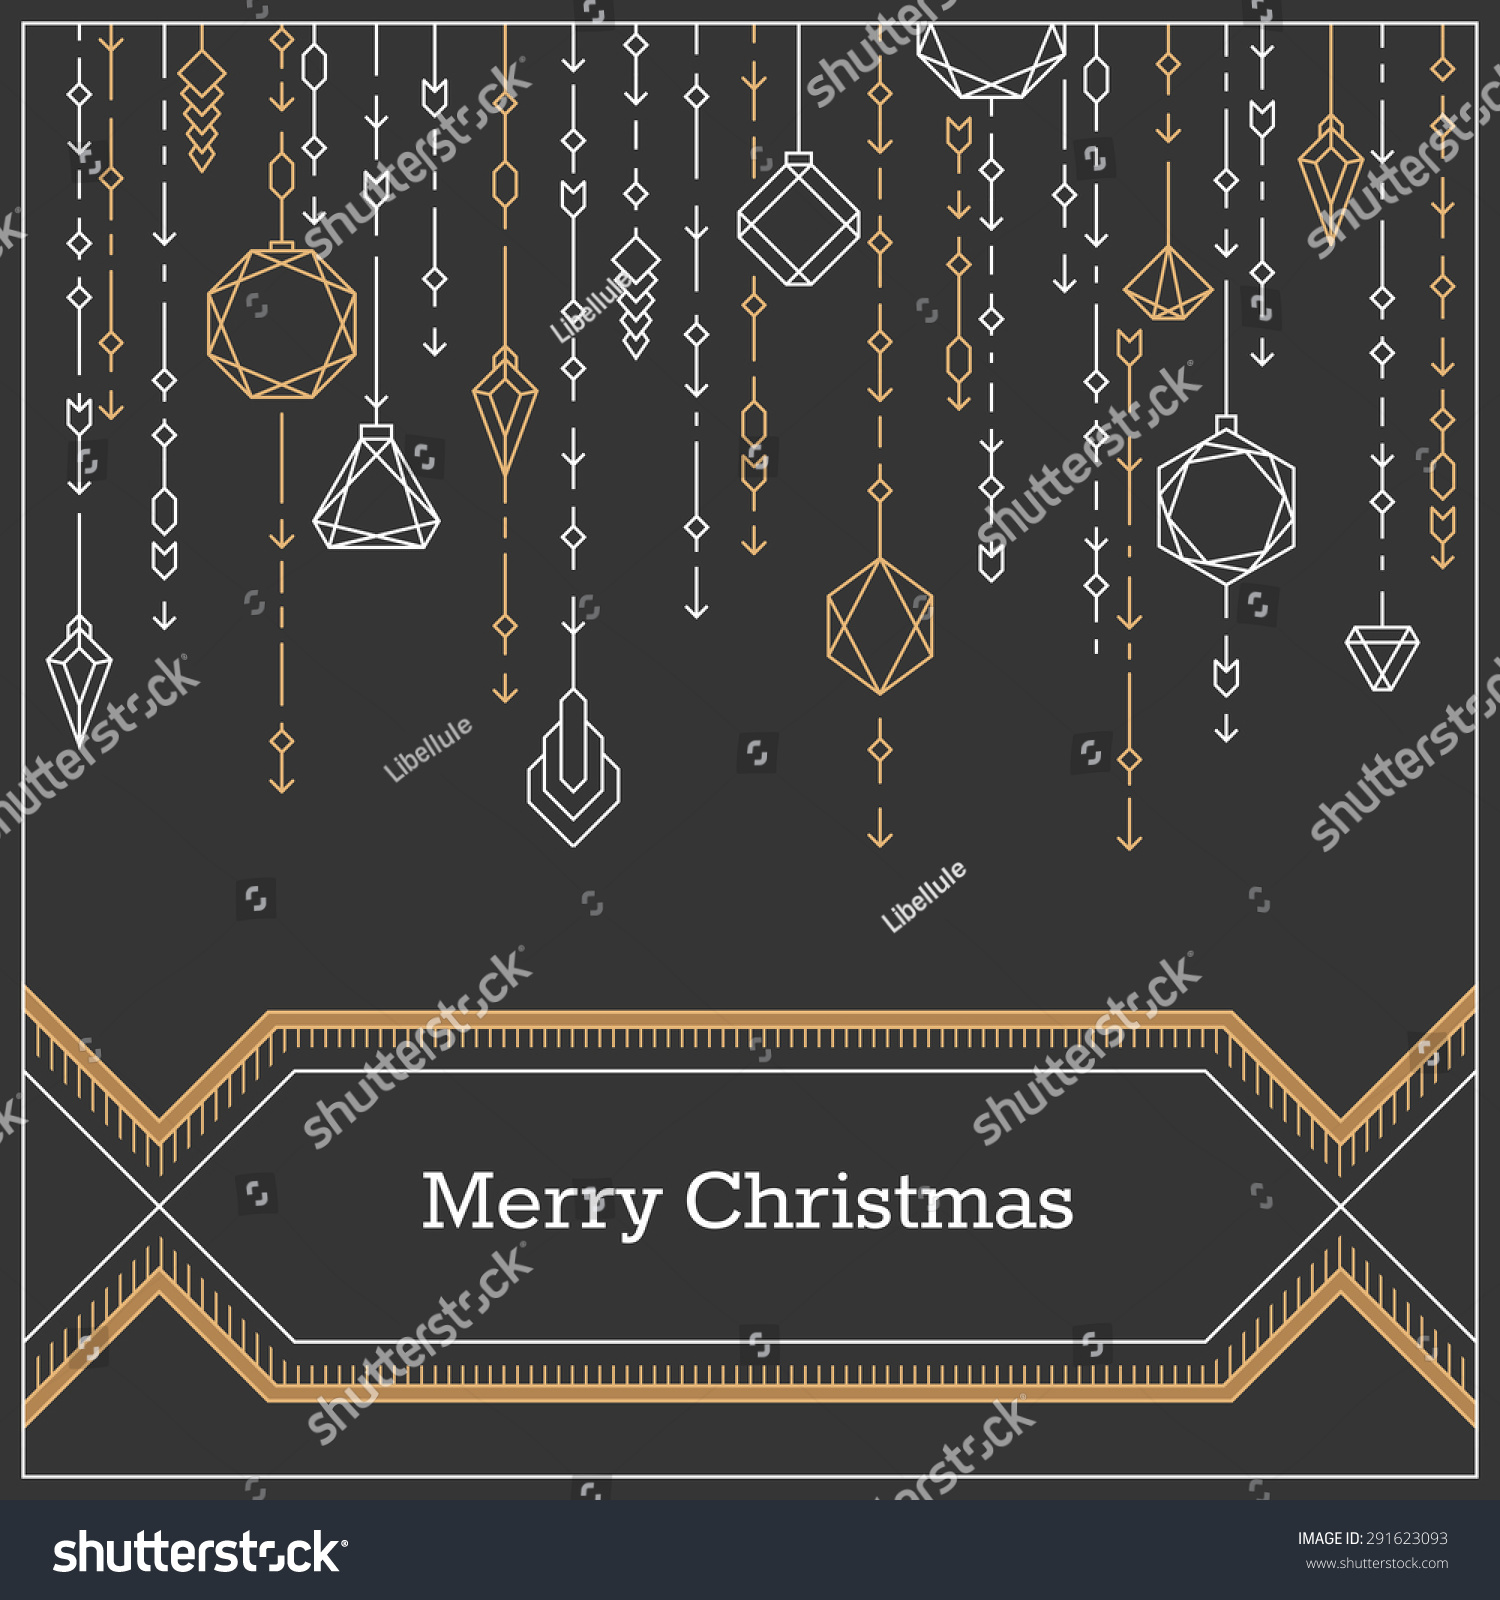 Christmas postcard art deco linear style new year background banner with decorative xmas balls